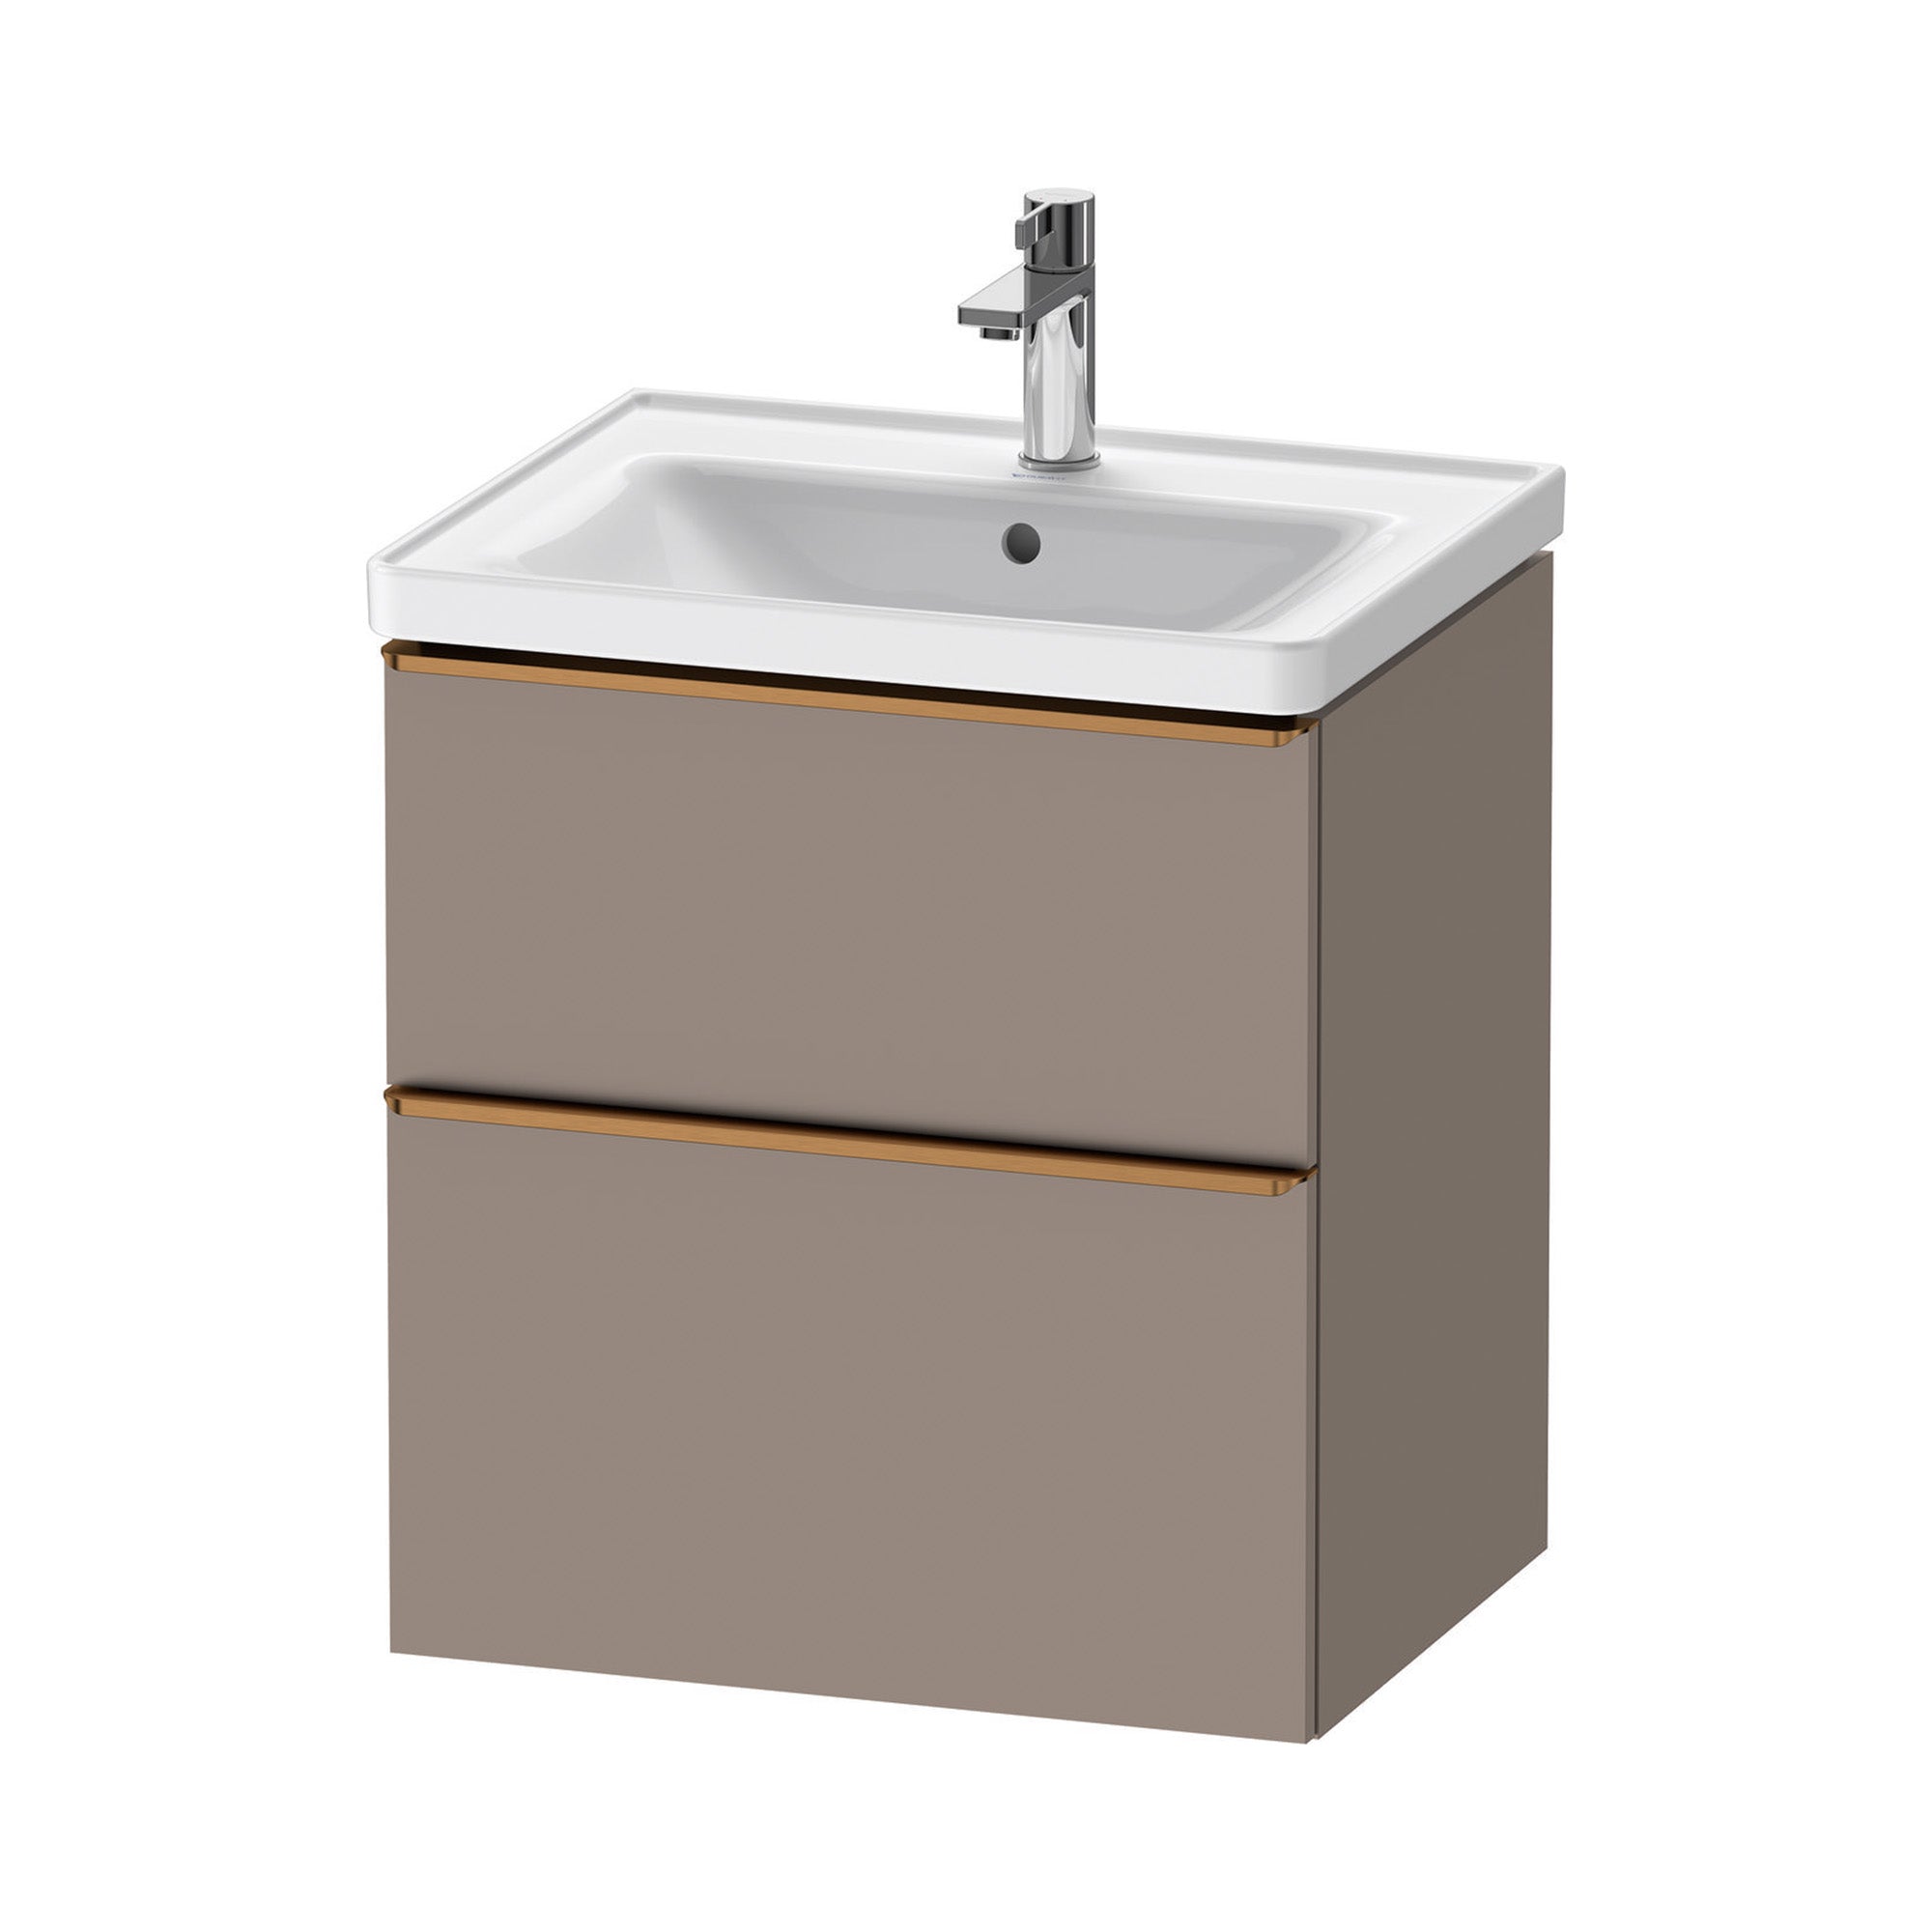 duravit d-neo 600 wall mounted vanity unit with d-neo basin basalt brushed bronze handles